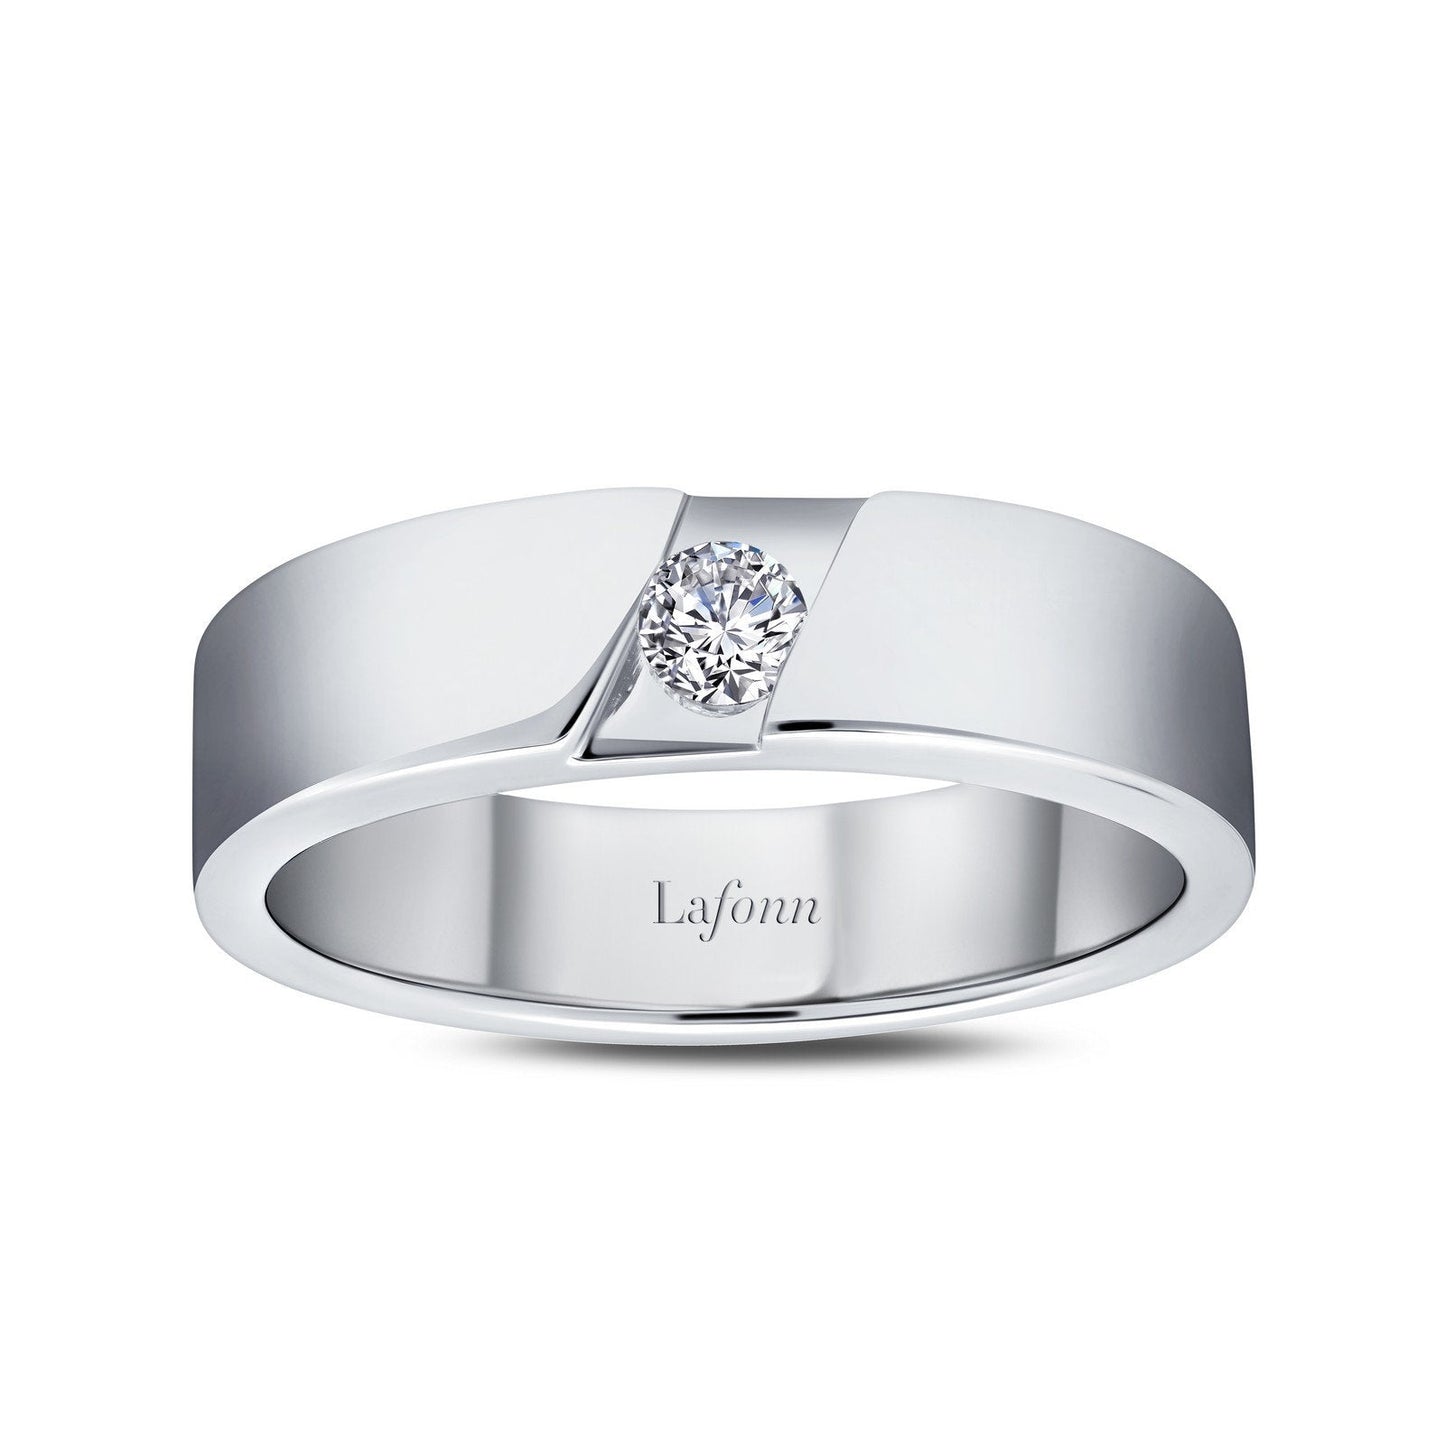 Lafonn 0.17 CTW Men's Wedding Band Simulated Diamond RINGS Size 12 Platinum 0.17 CTS Approx. 5.7mm (W)